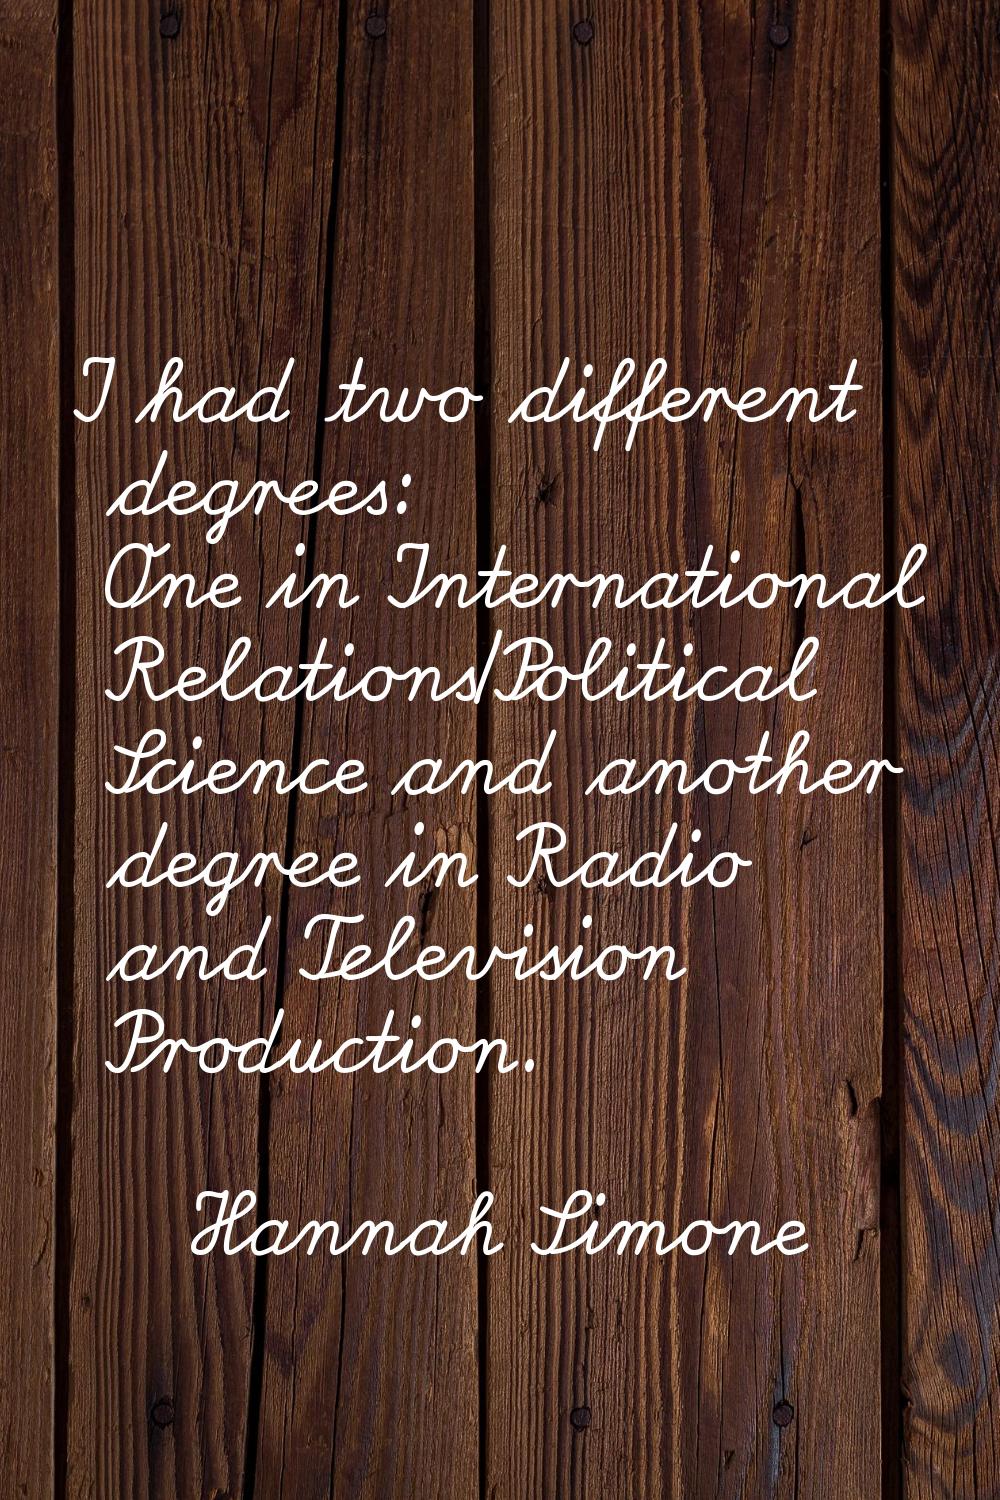 I had two different degrees: One in International Relations/Political Science and another degree in